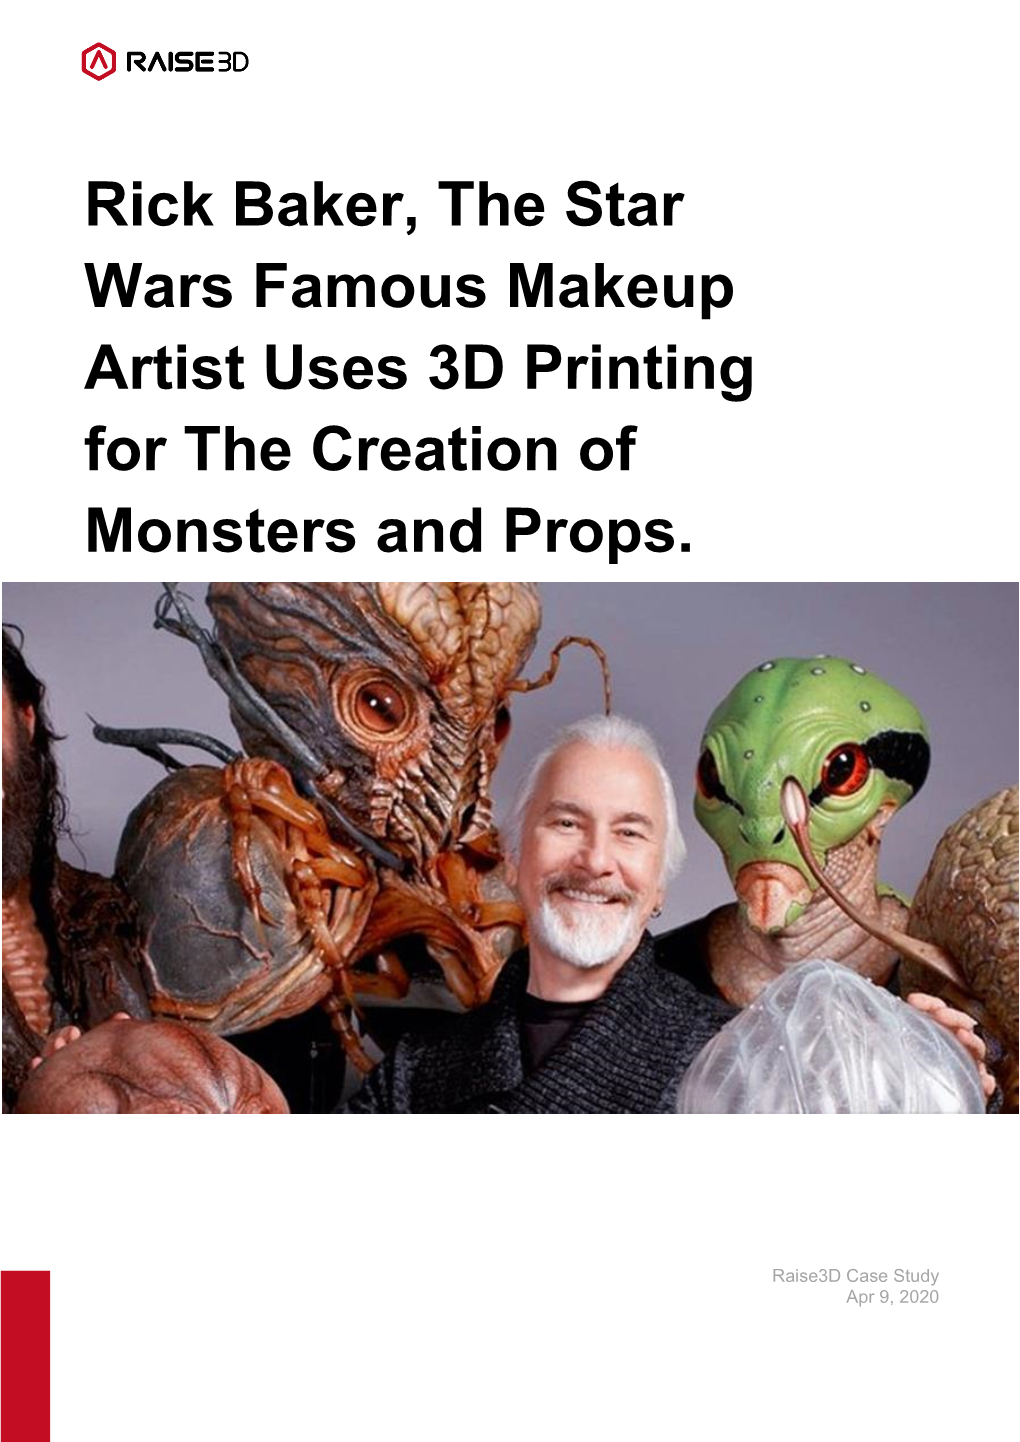 Rick Baker, the Star Wars Famous Makeup Artist Uses 3D Printing for the Creation of Monsters and Props